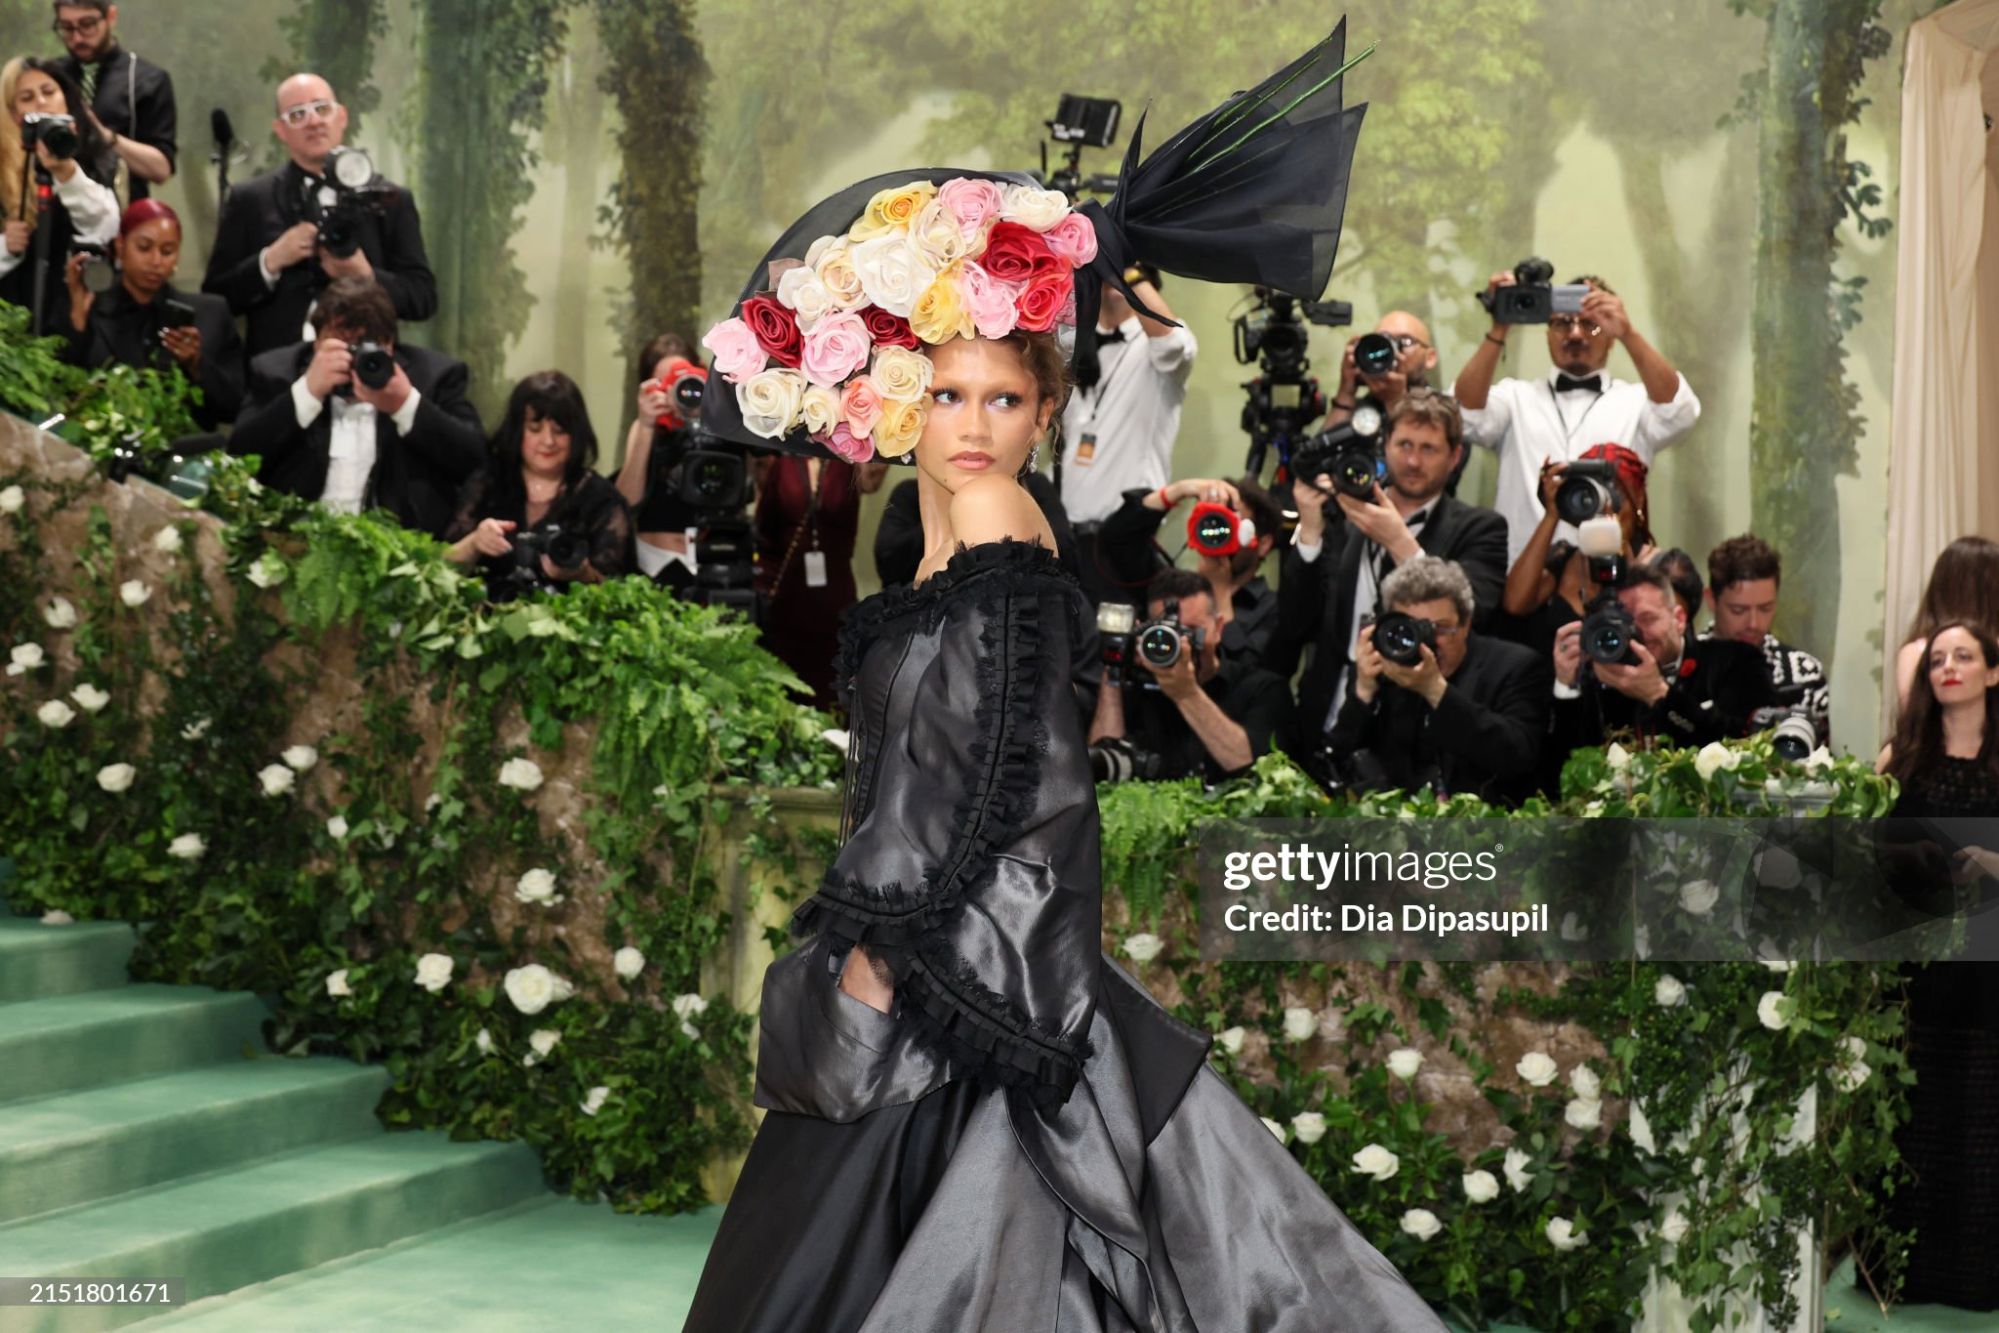 gettyimages-2151801671-2048x2048.jpg